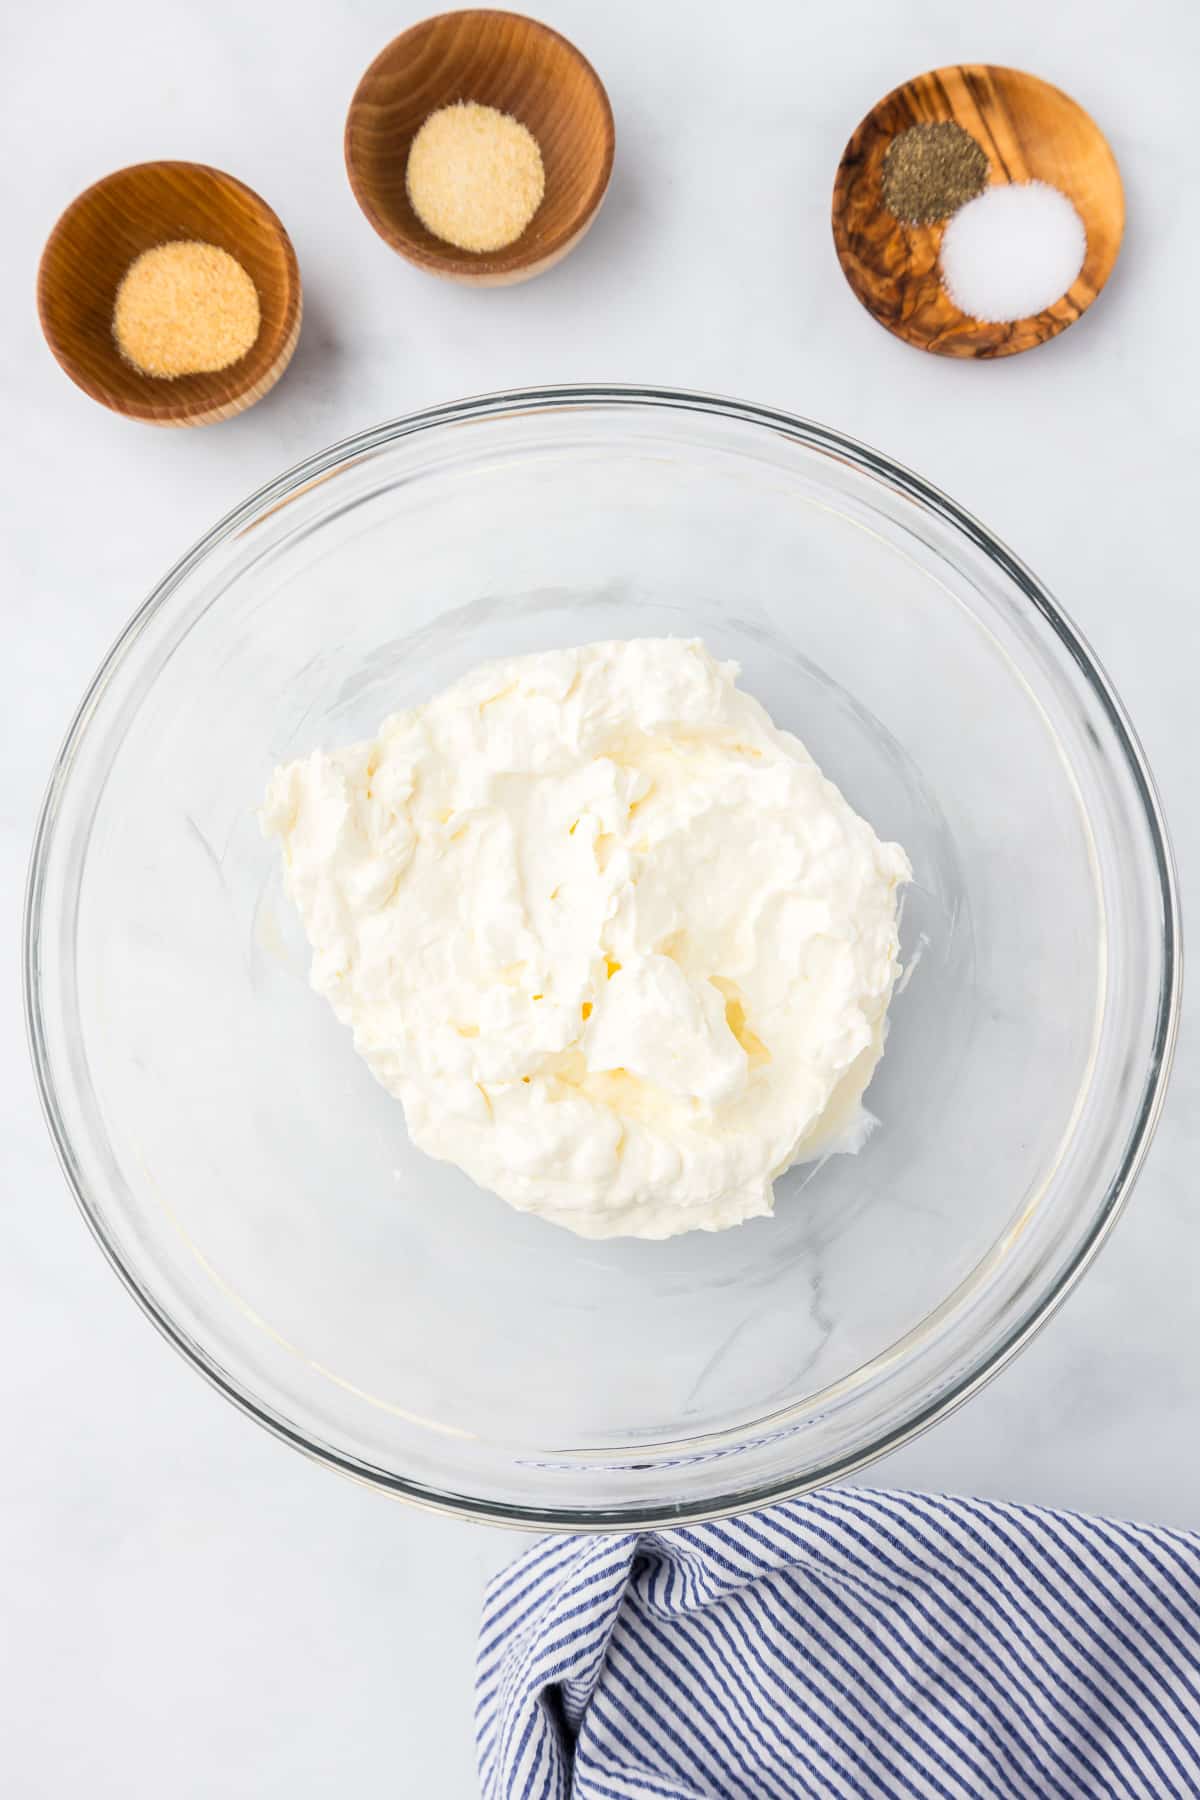 Sour cream and cream cheese mixed together in a glass bowl with spices in bowls nearby.